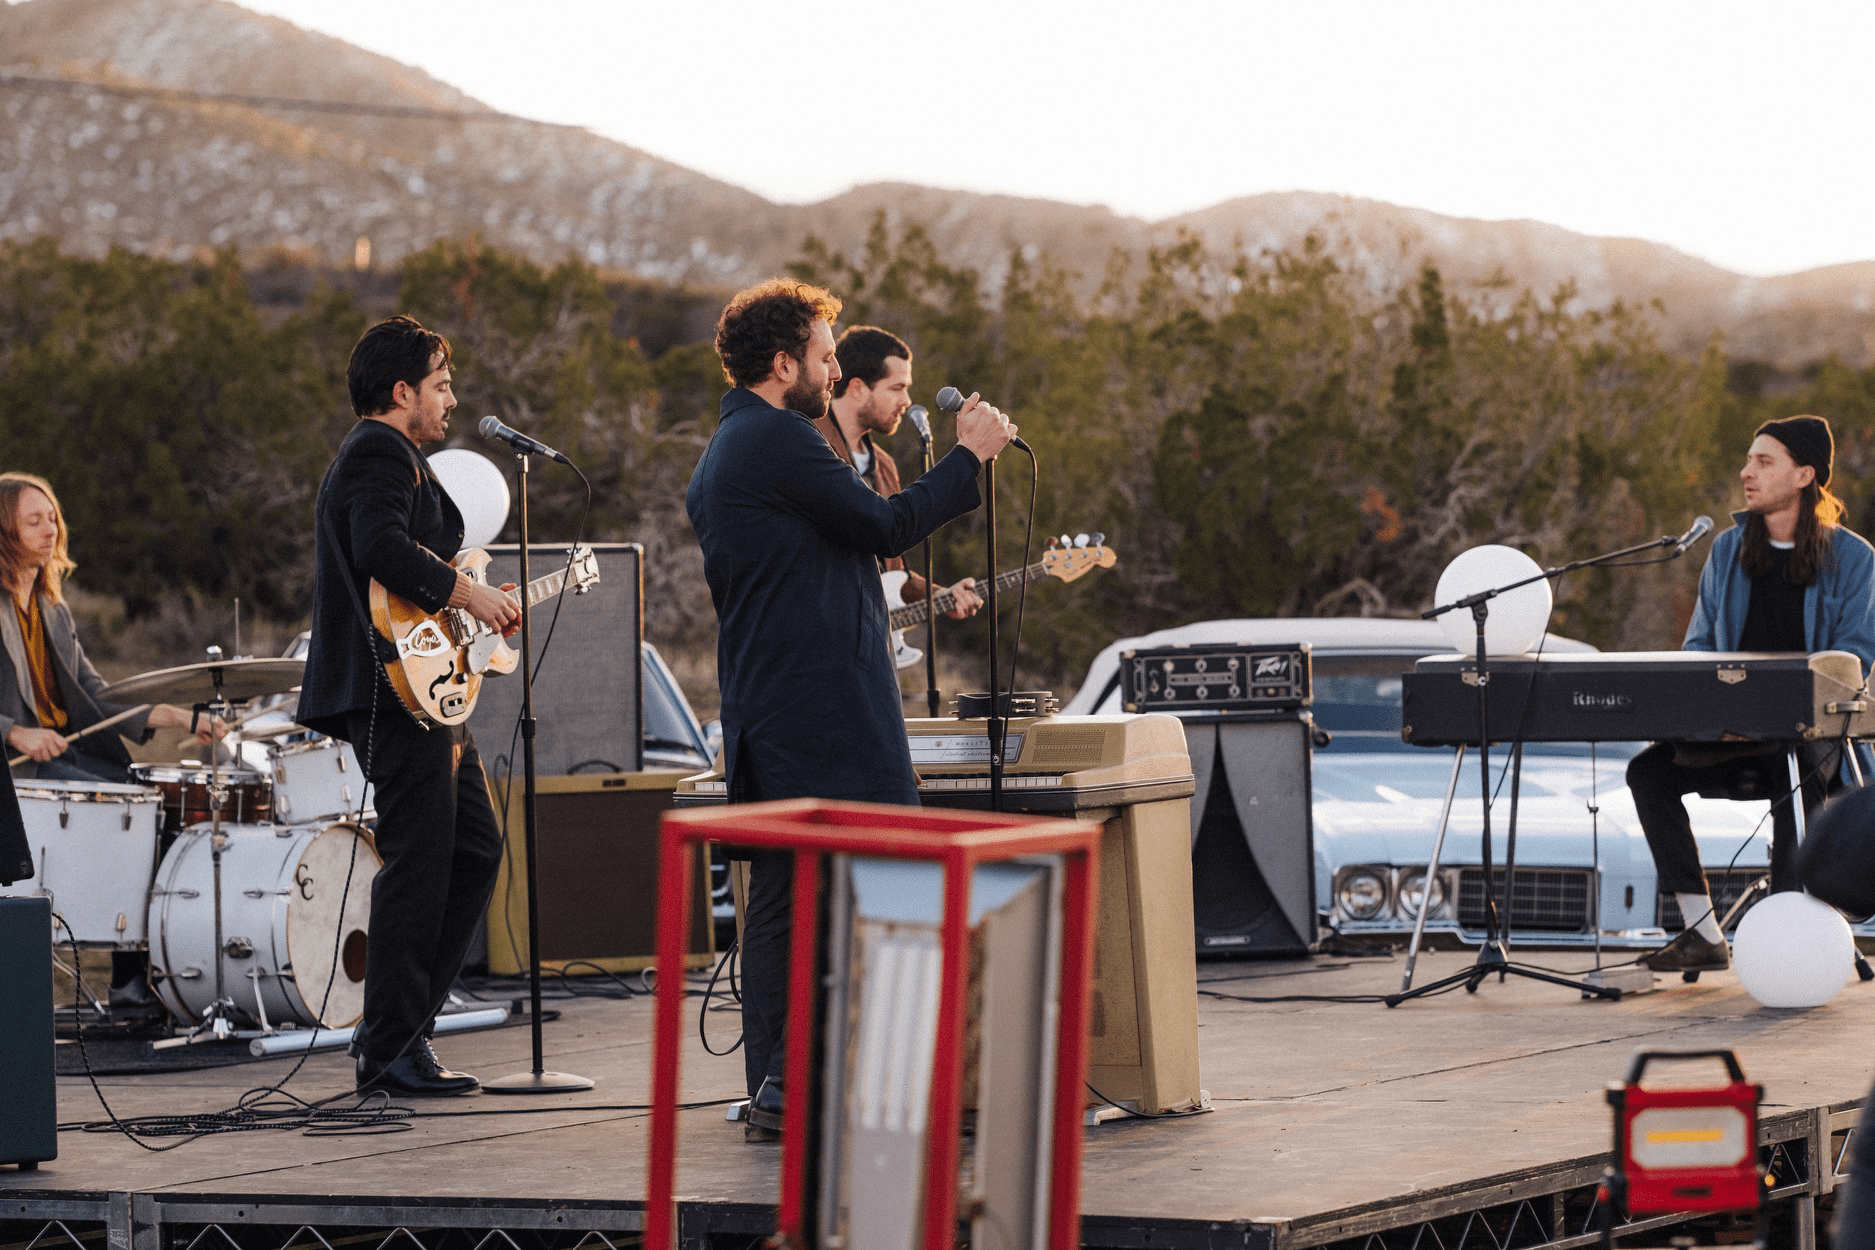 The members of Local Natives preform on an outdoor stage in the desert